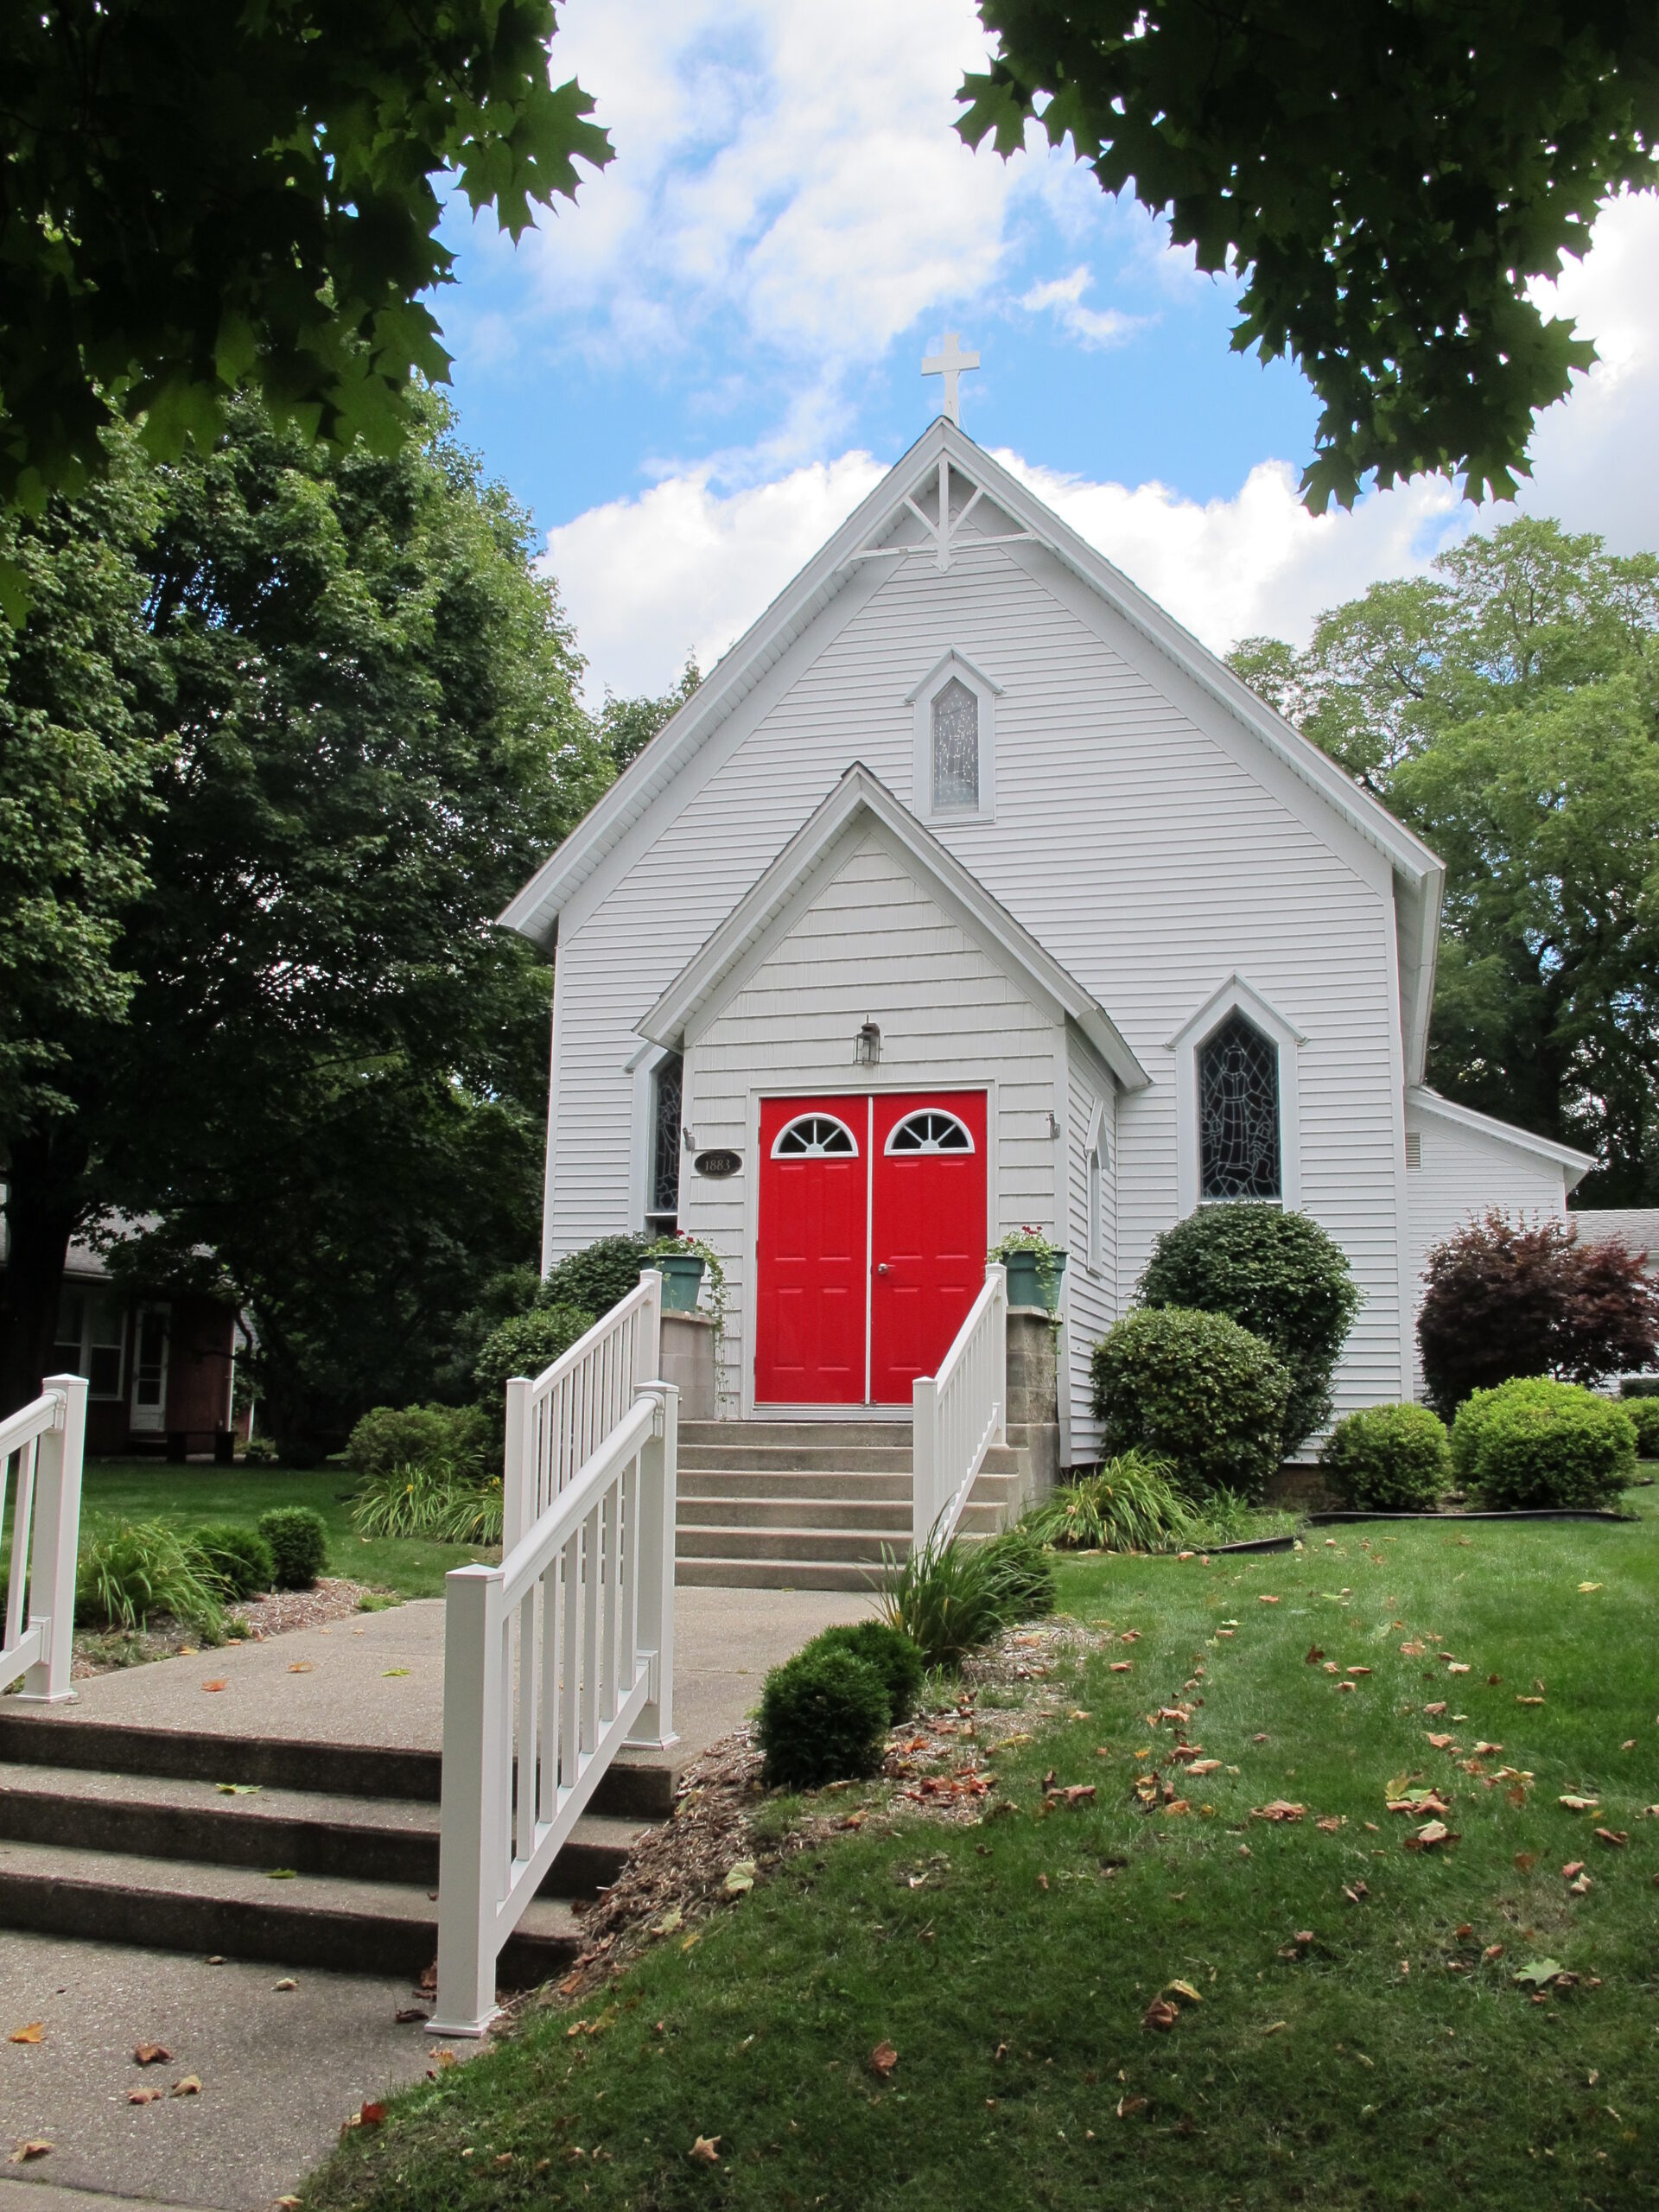 donald trumps photo op -- before a sister church of this Episcopal church in Pentwater, Michigan.